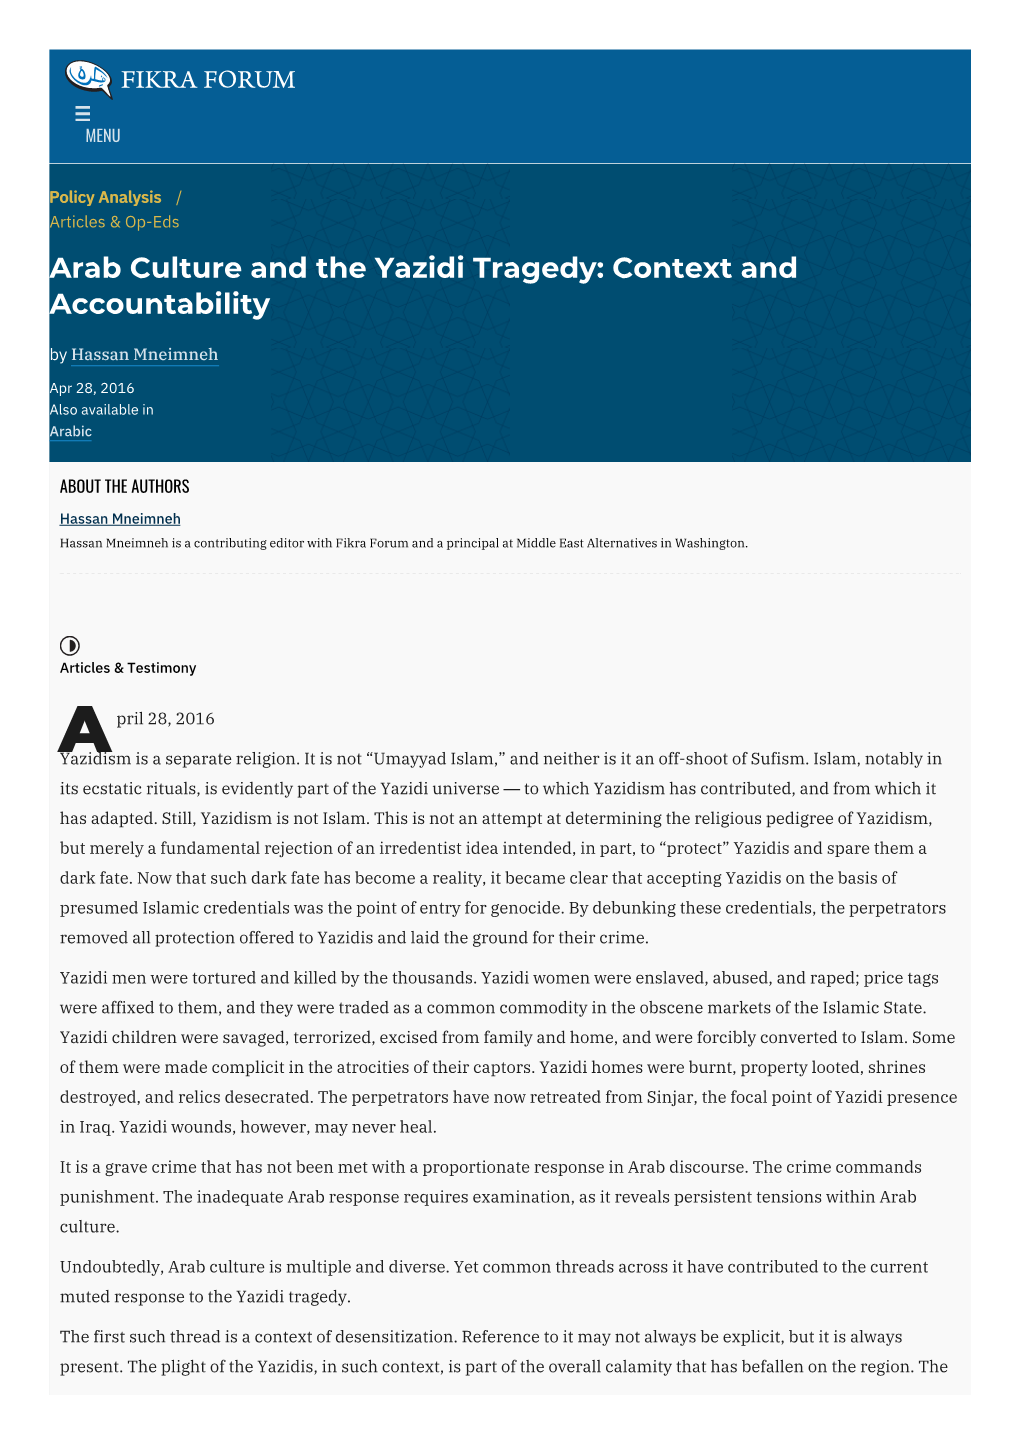 Arab Culture and the Yazidi Tragedy: Context and Accountability by Hassan Mneimneh